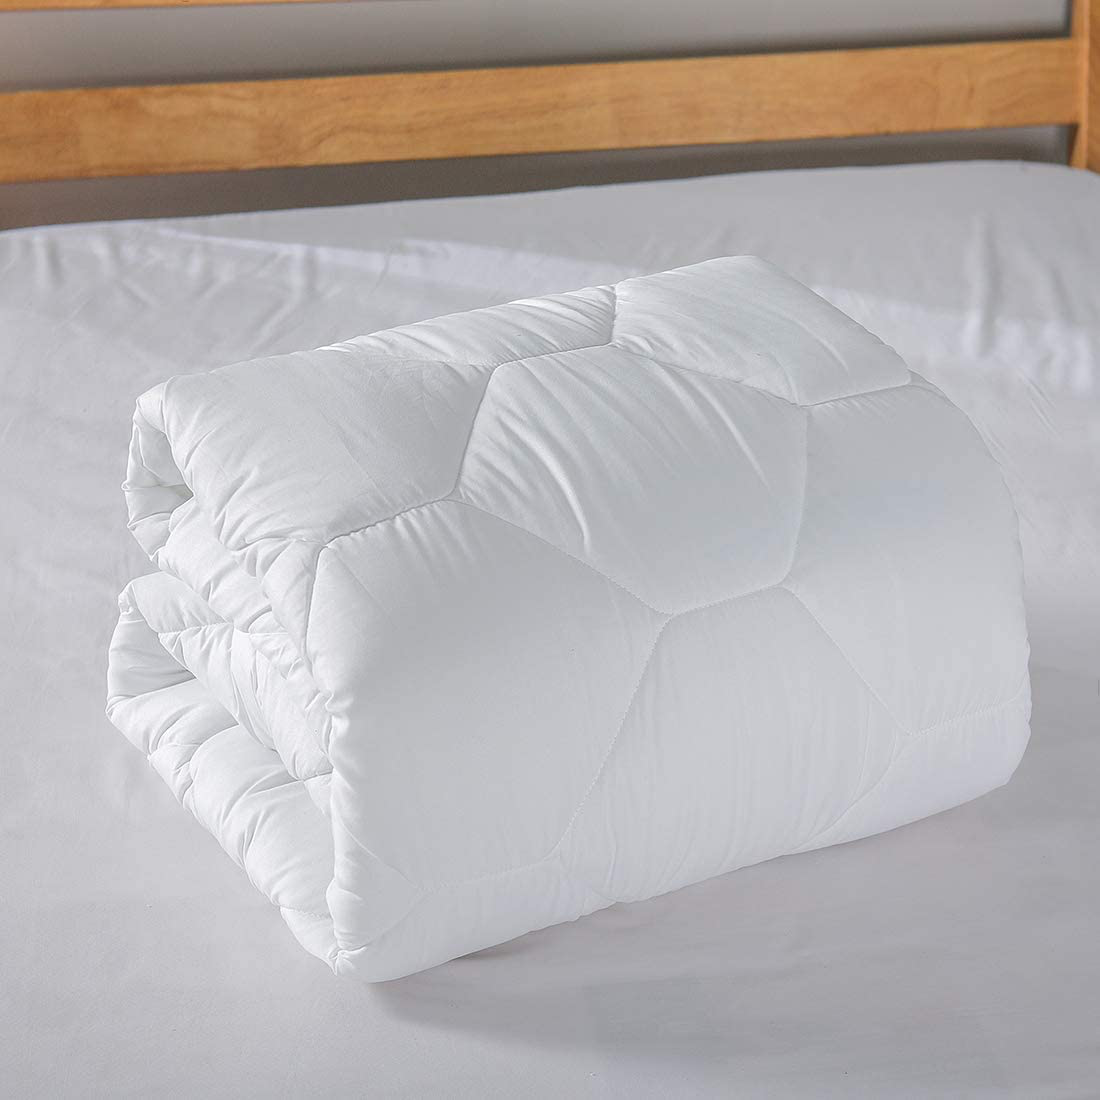 Twin Mattress Pad, 8-21" Deep Pocket Protector Ultra Soft Quilted Fitted Topper Cover Breathable Fit for Dorm Home Hotel -White